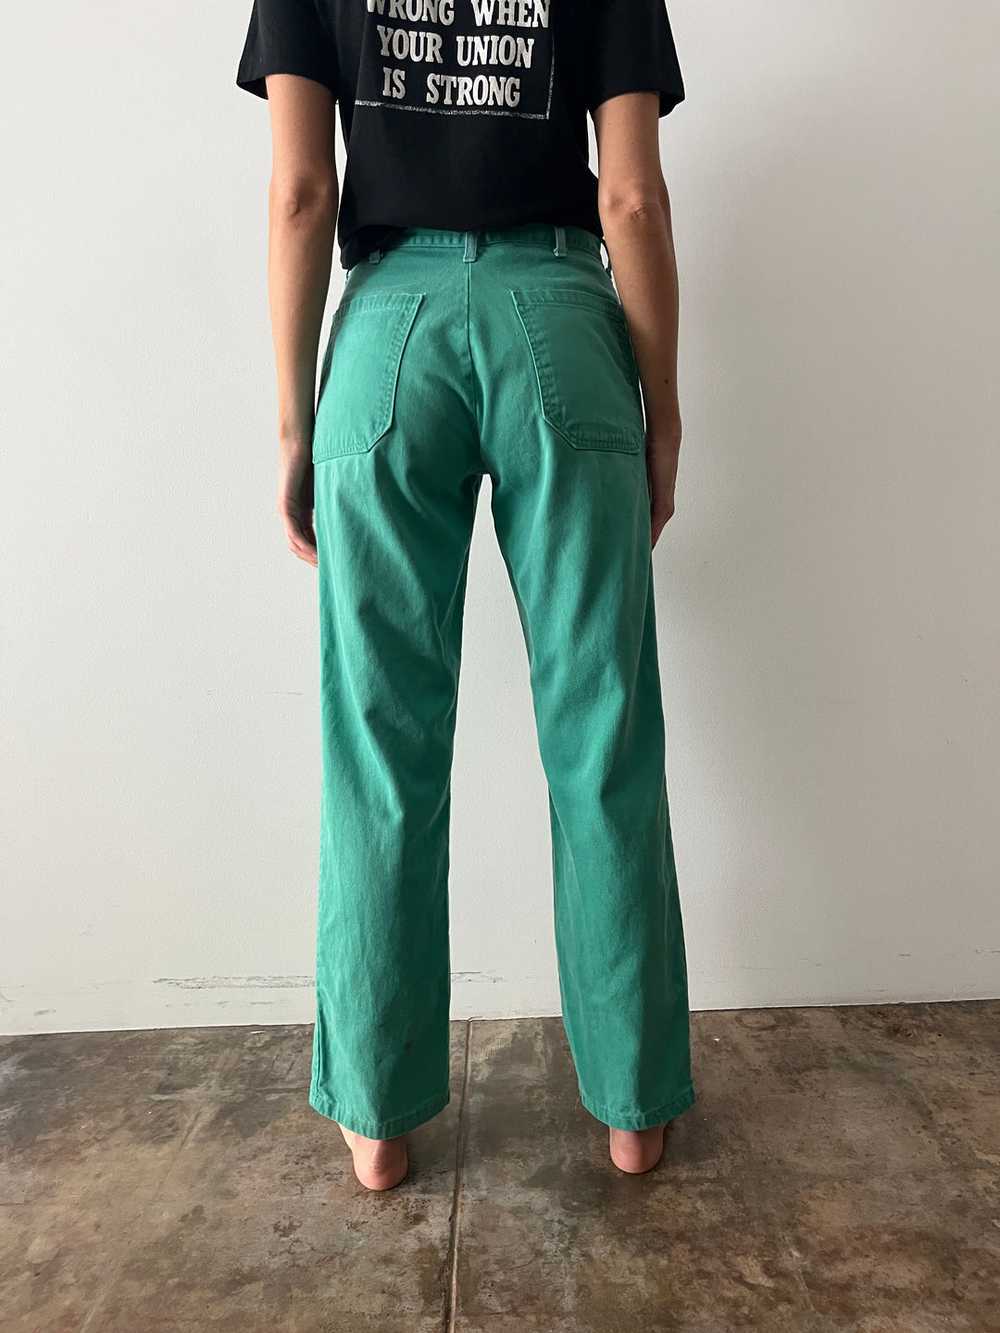 70s/80s Green Cotton Work Pants - image 4